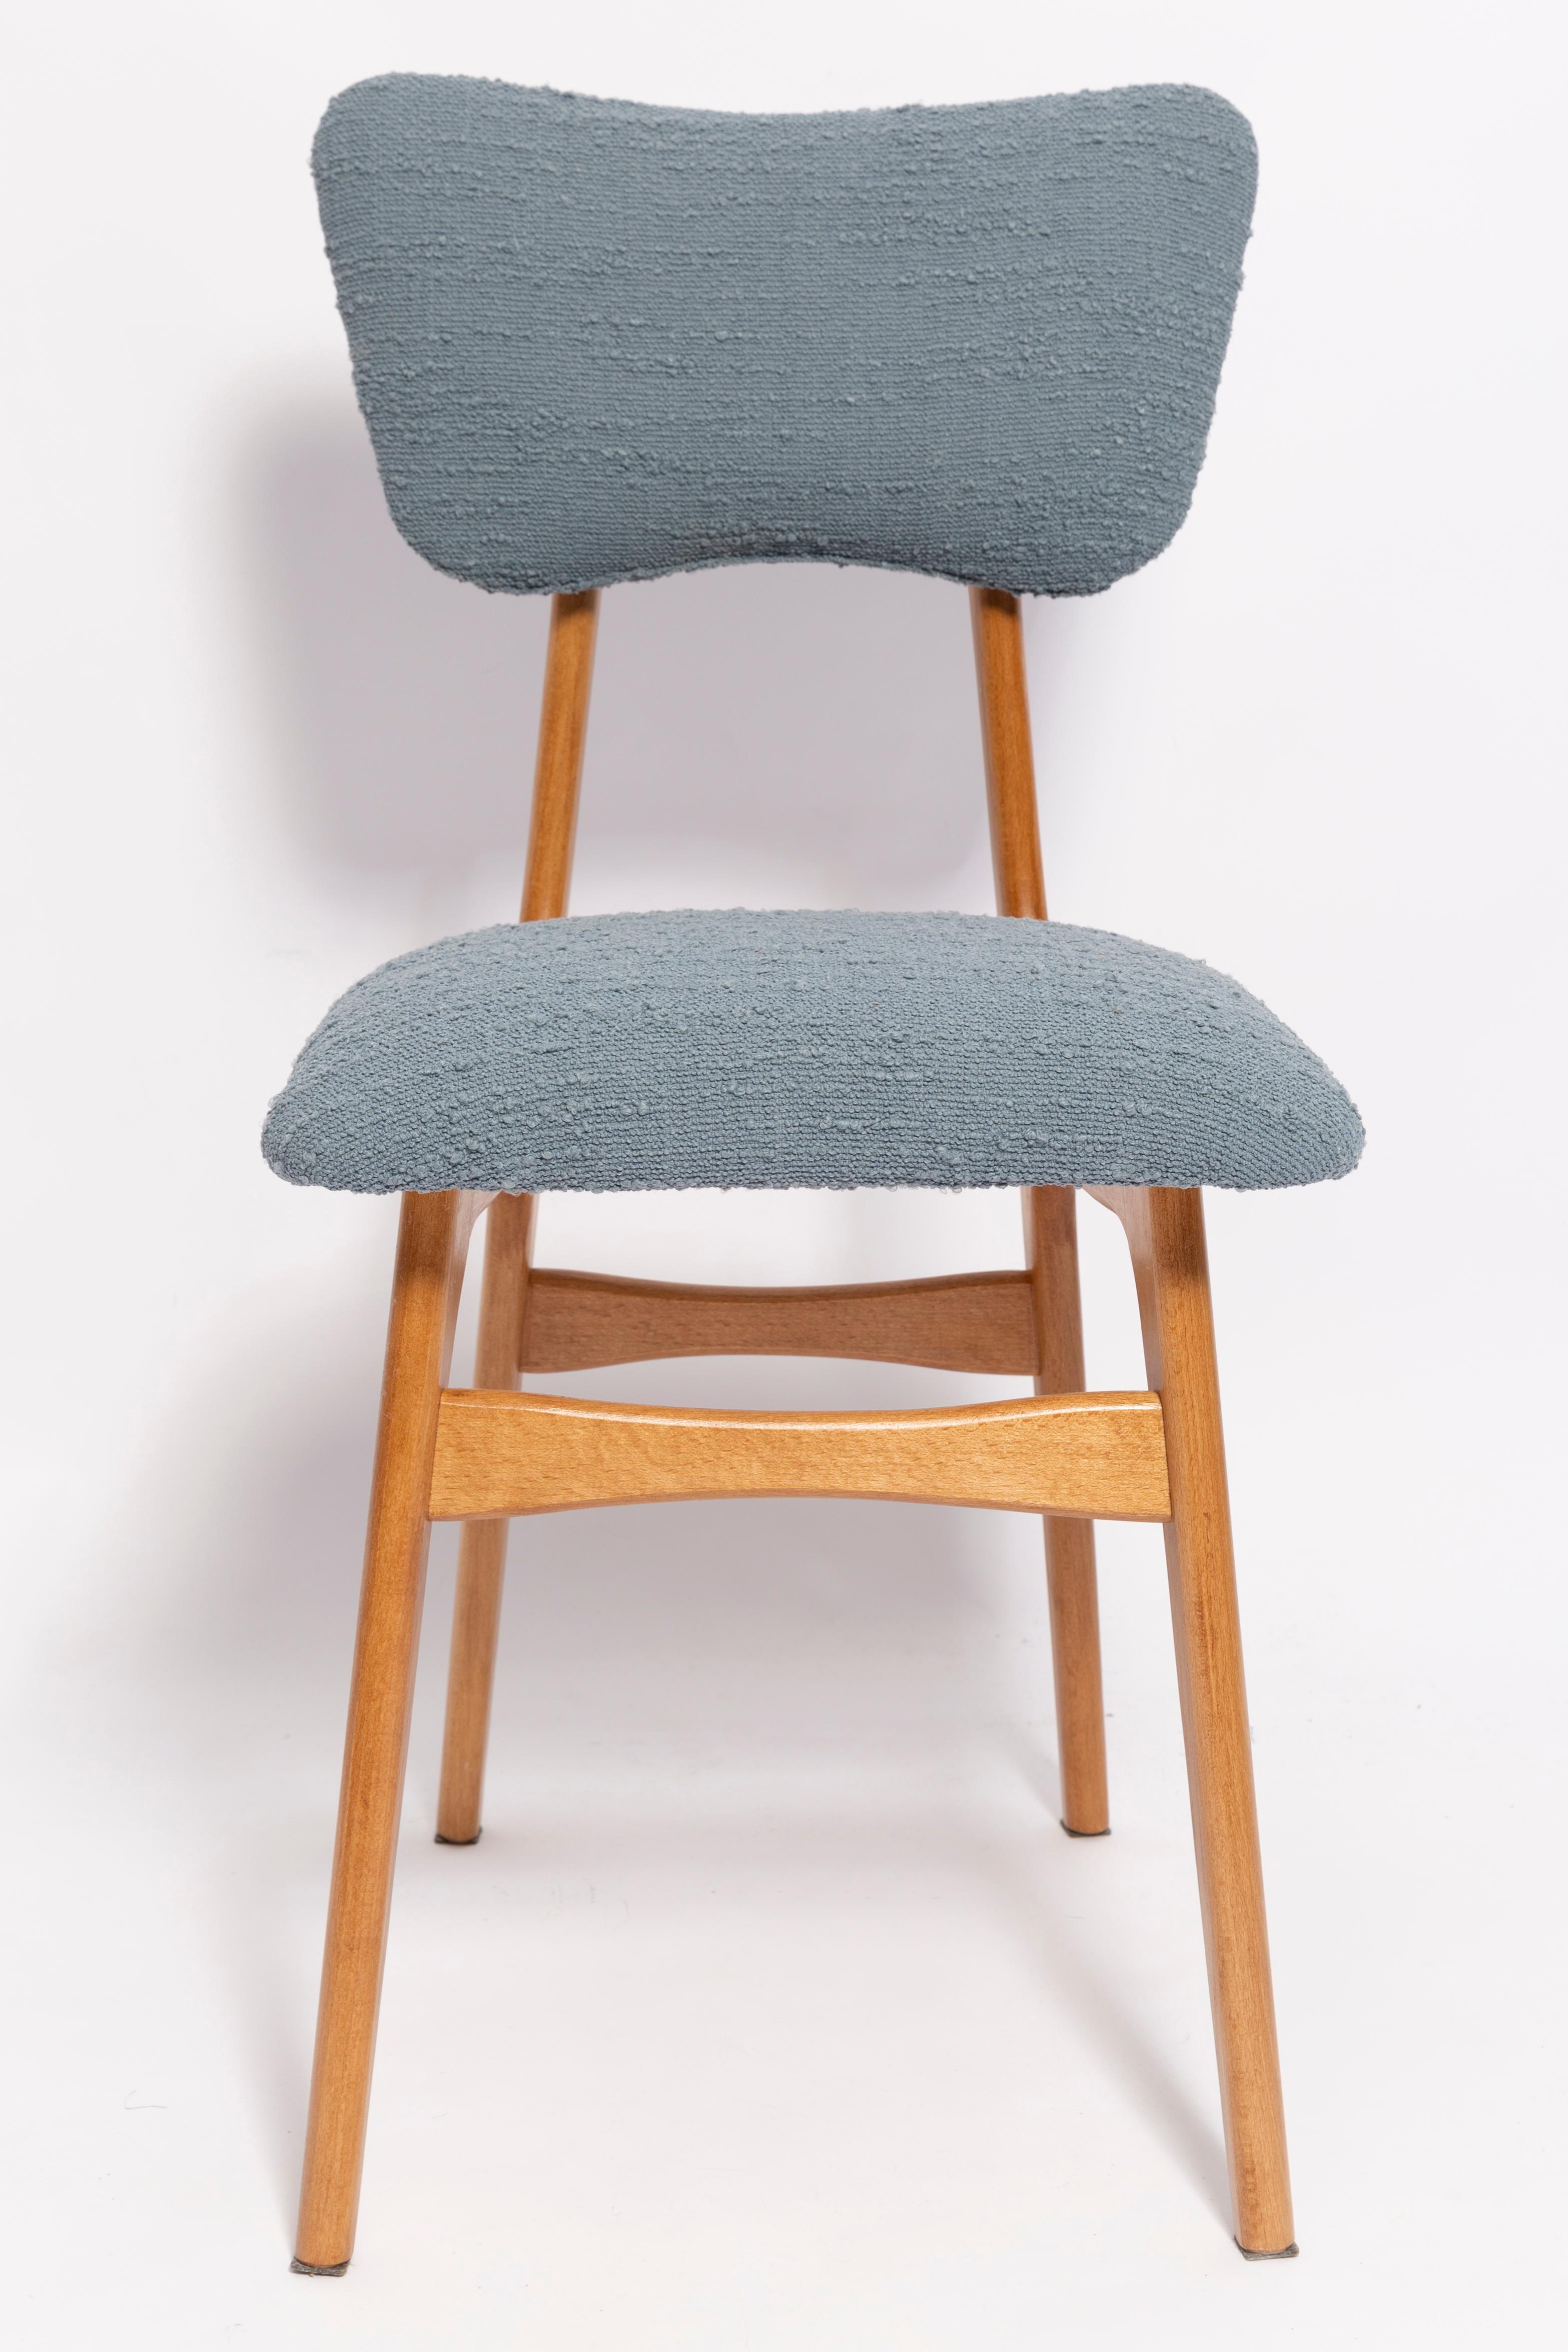 Set of Six Mid Century Butterfly Dining Chairs, Gray Boucle, Europe, 1960s For Sale 4